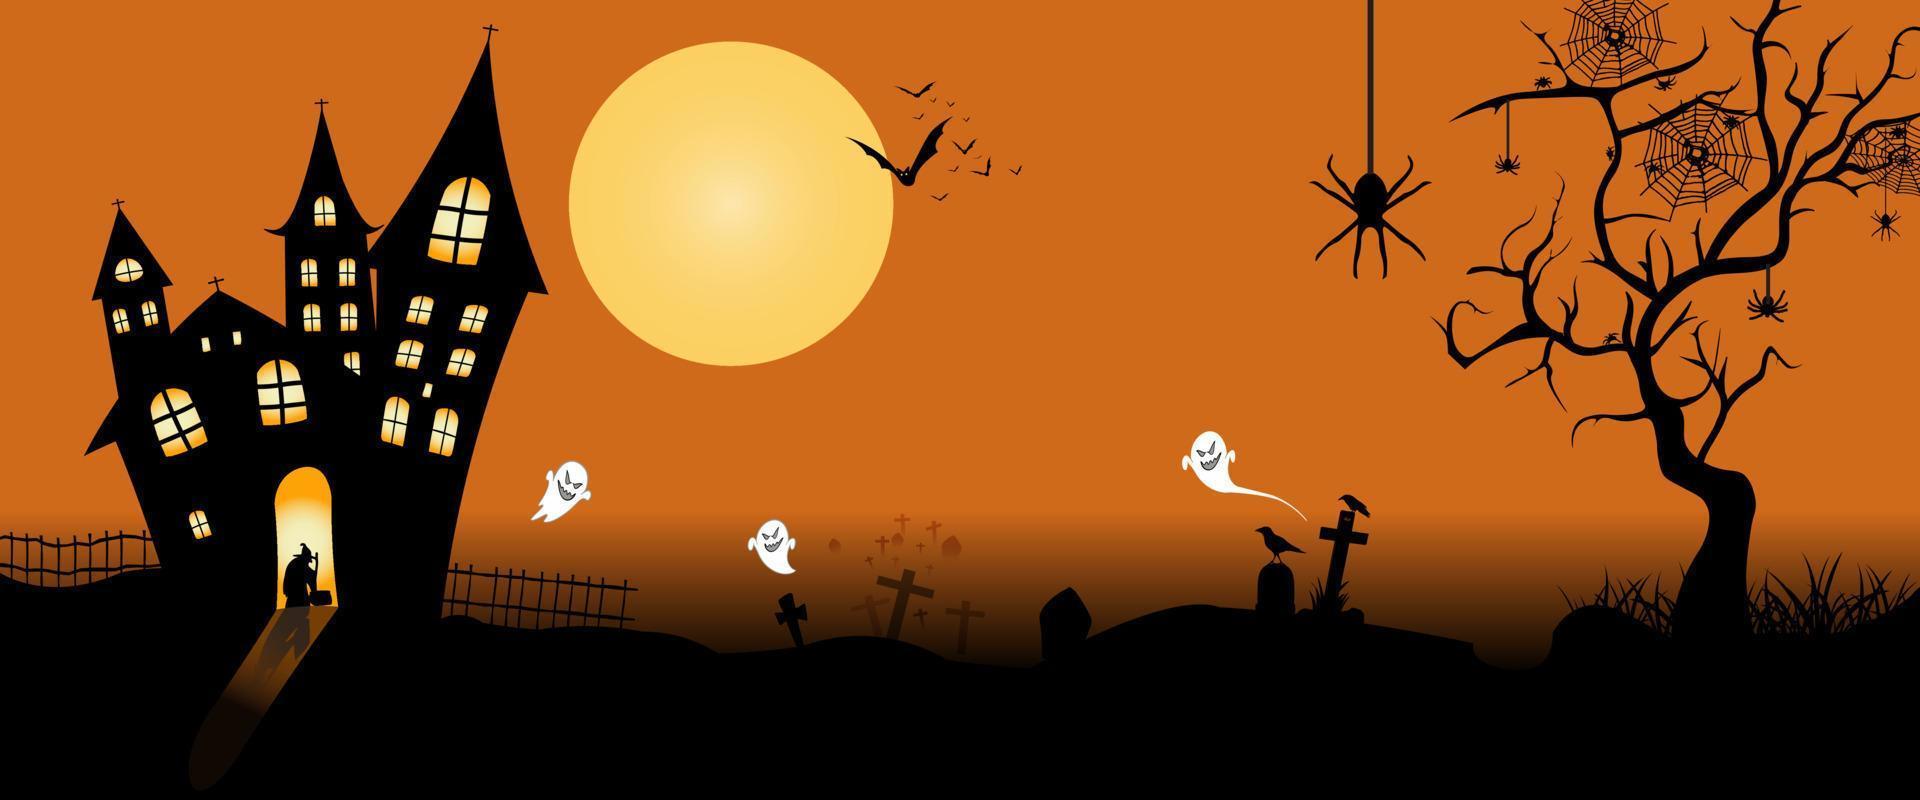 Halloween concept background or party invitation background with a moon night and castle. Vector illustration.